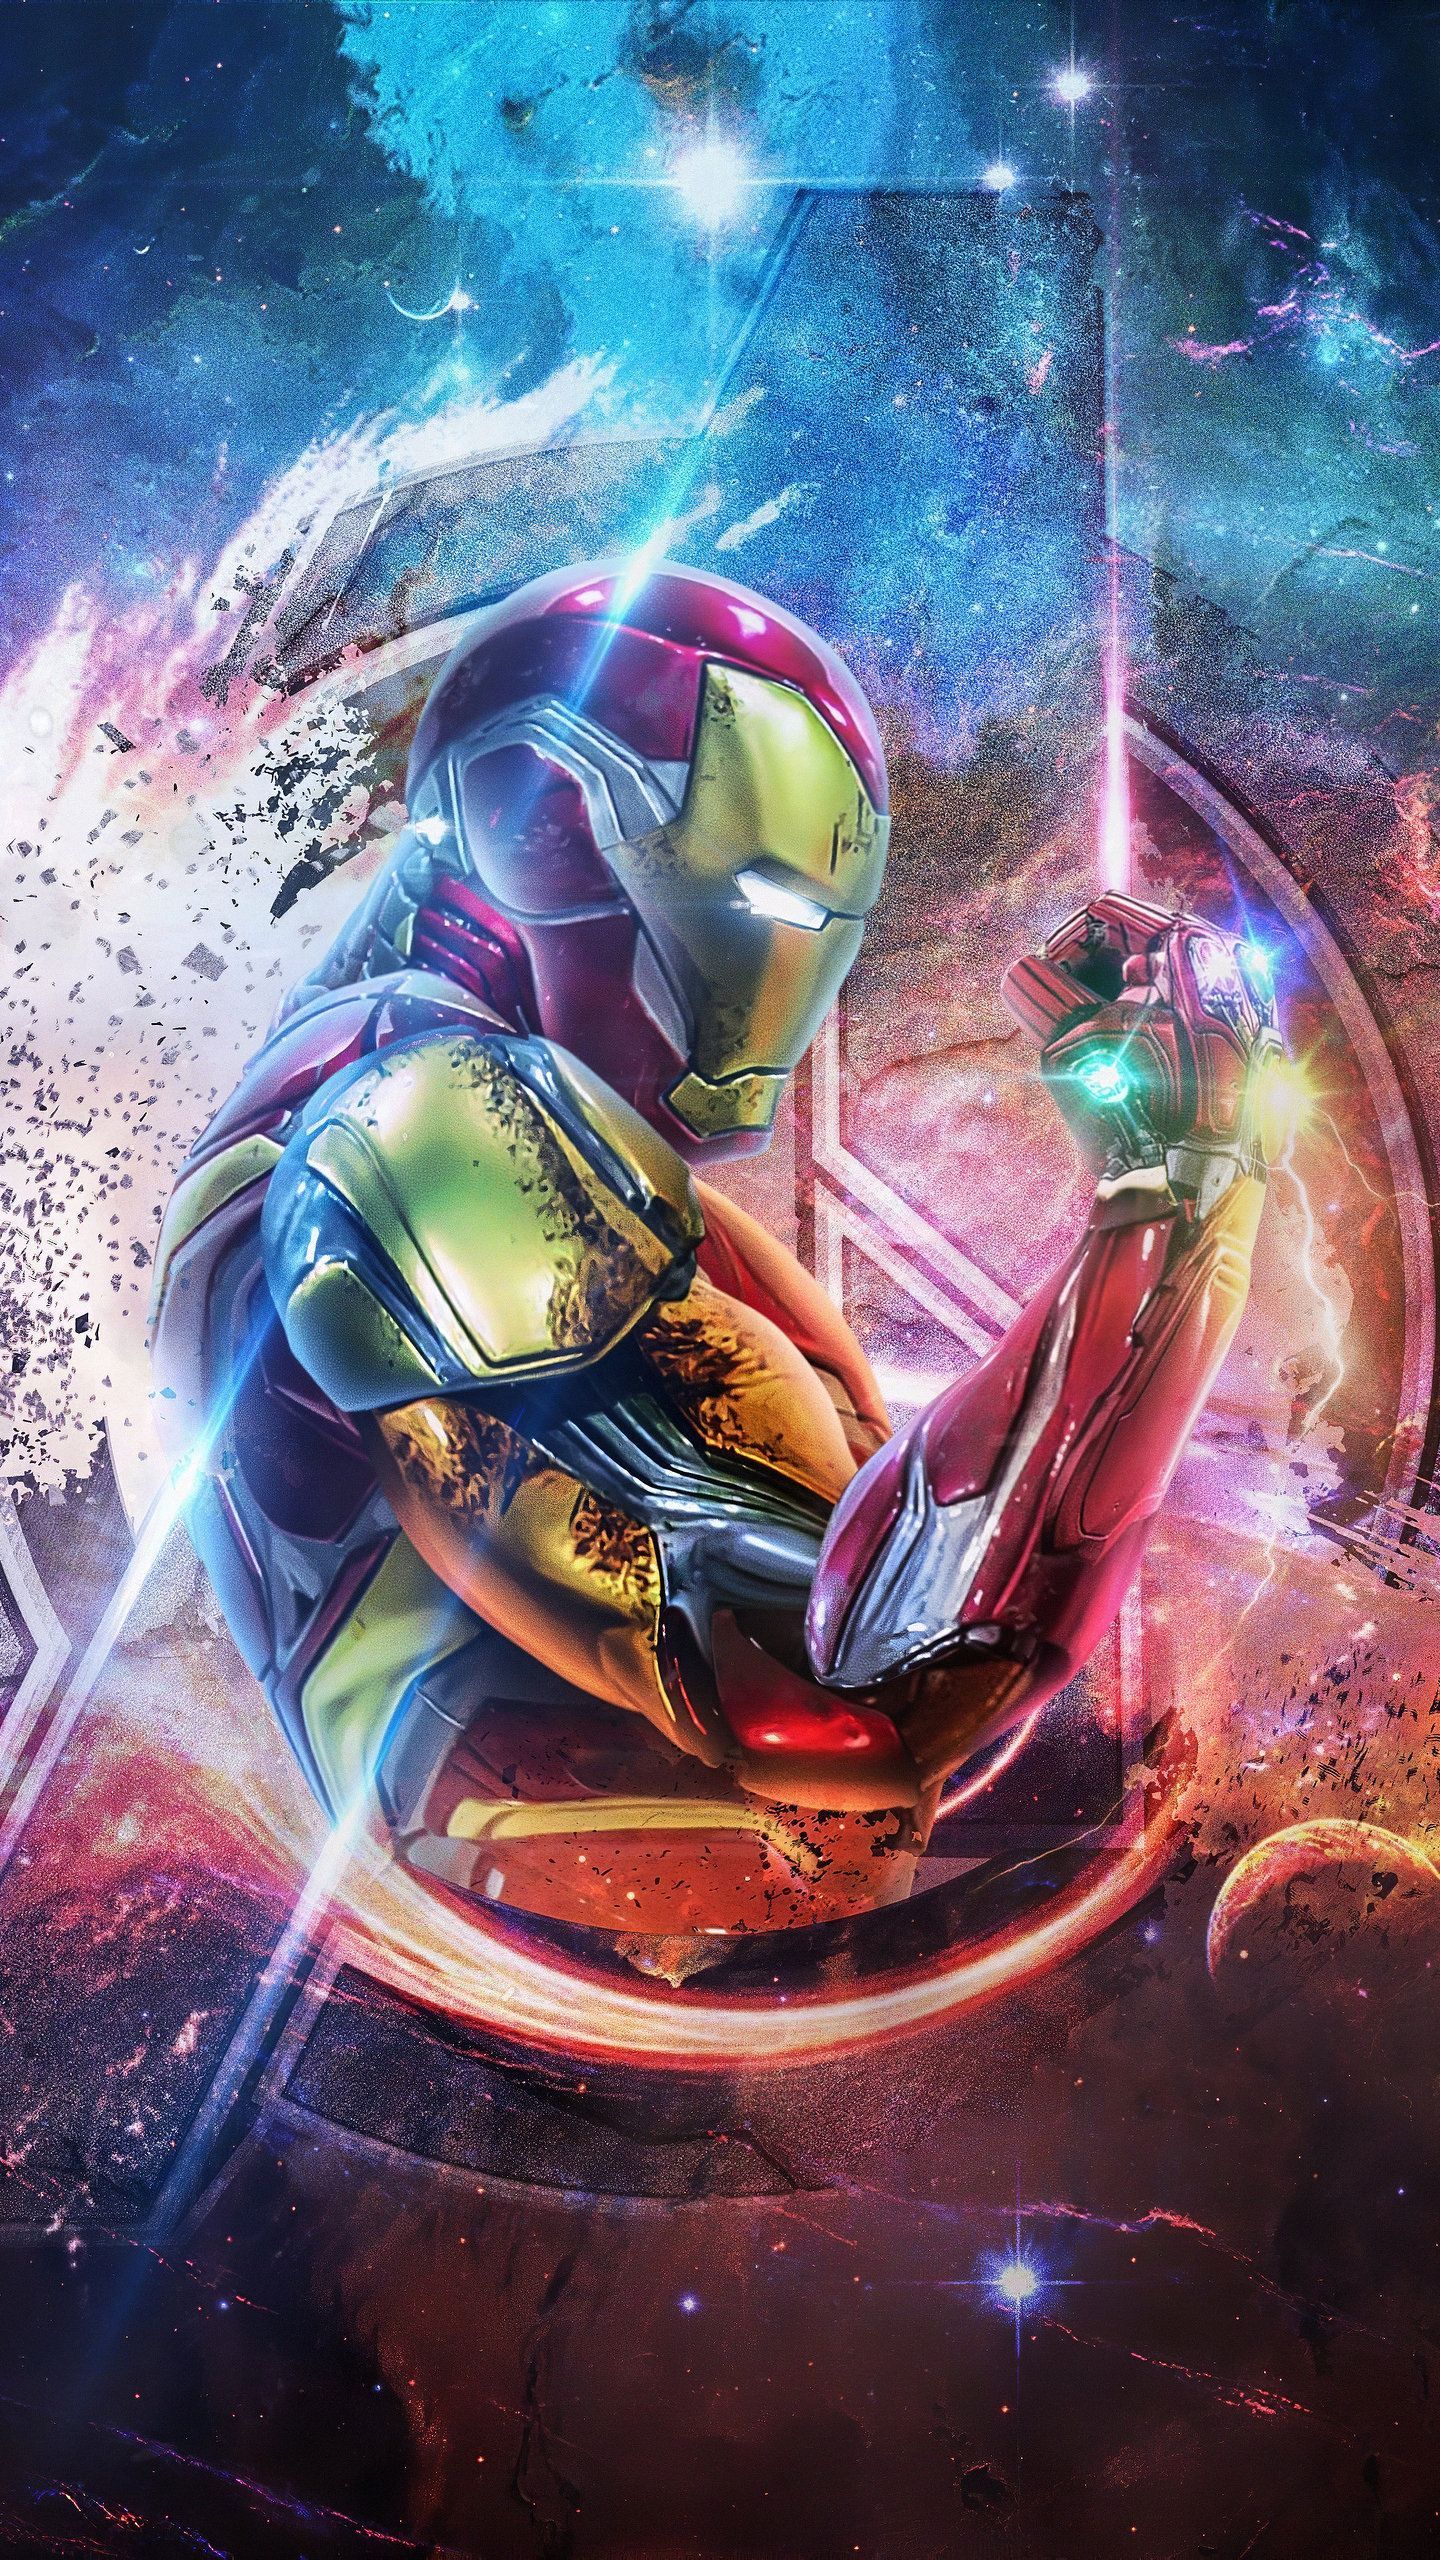 Cool Iron Man Marvel Comic 2020 Wallpapers Wallpaper Cave 656 